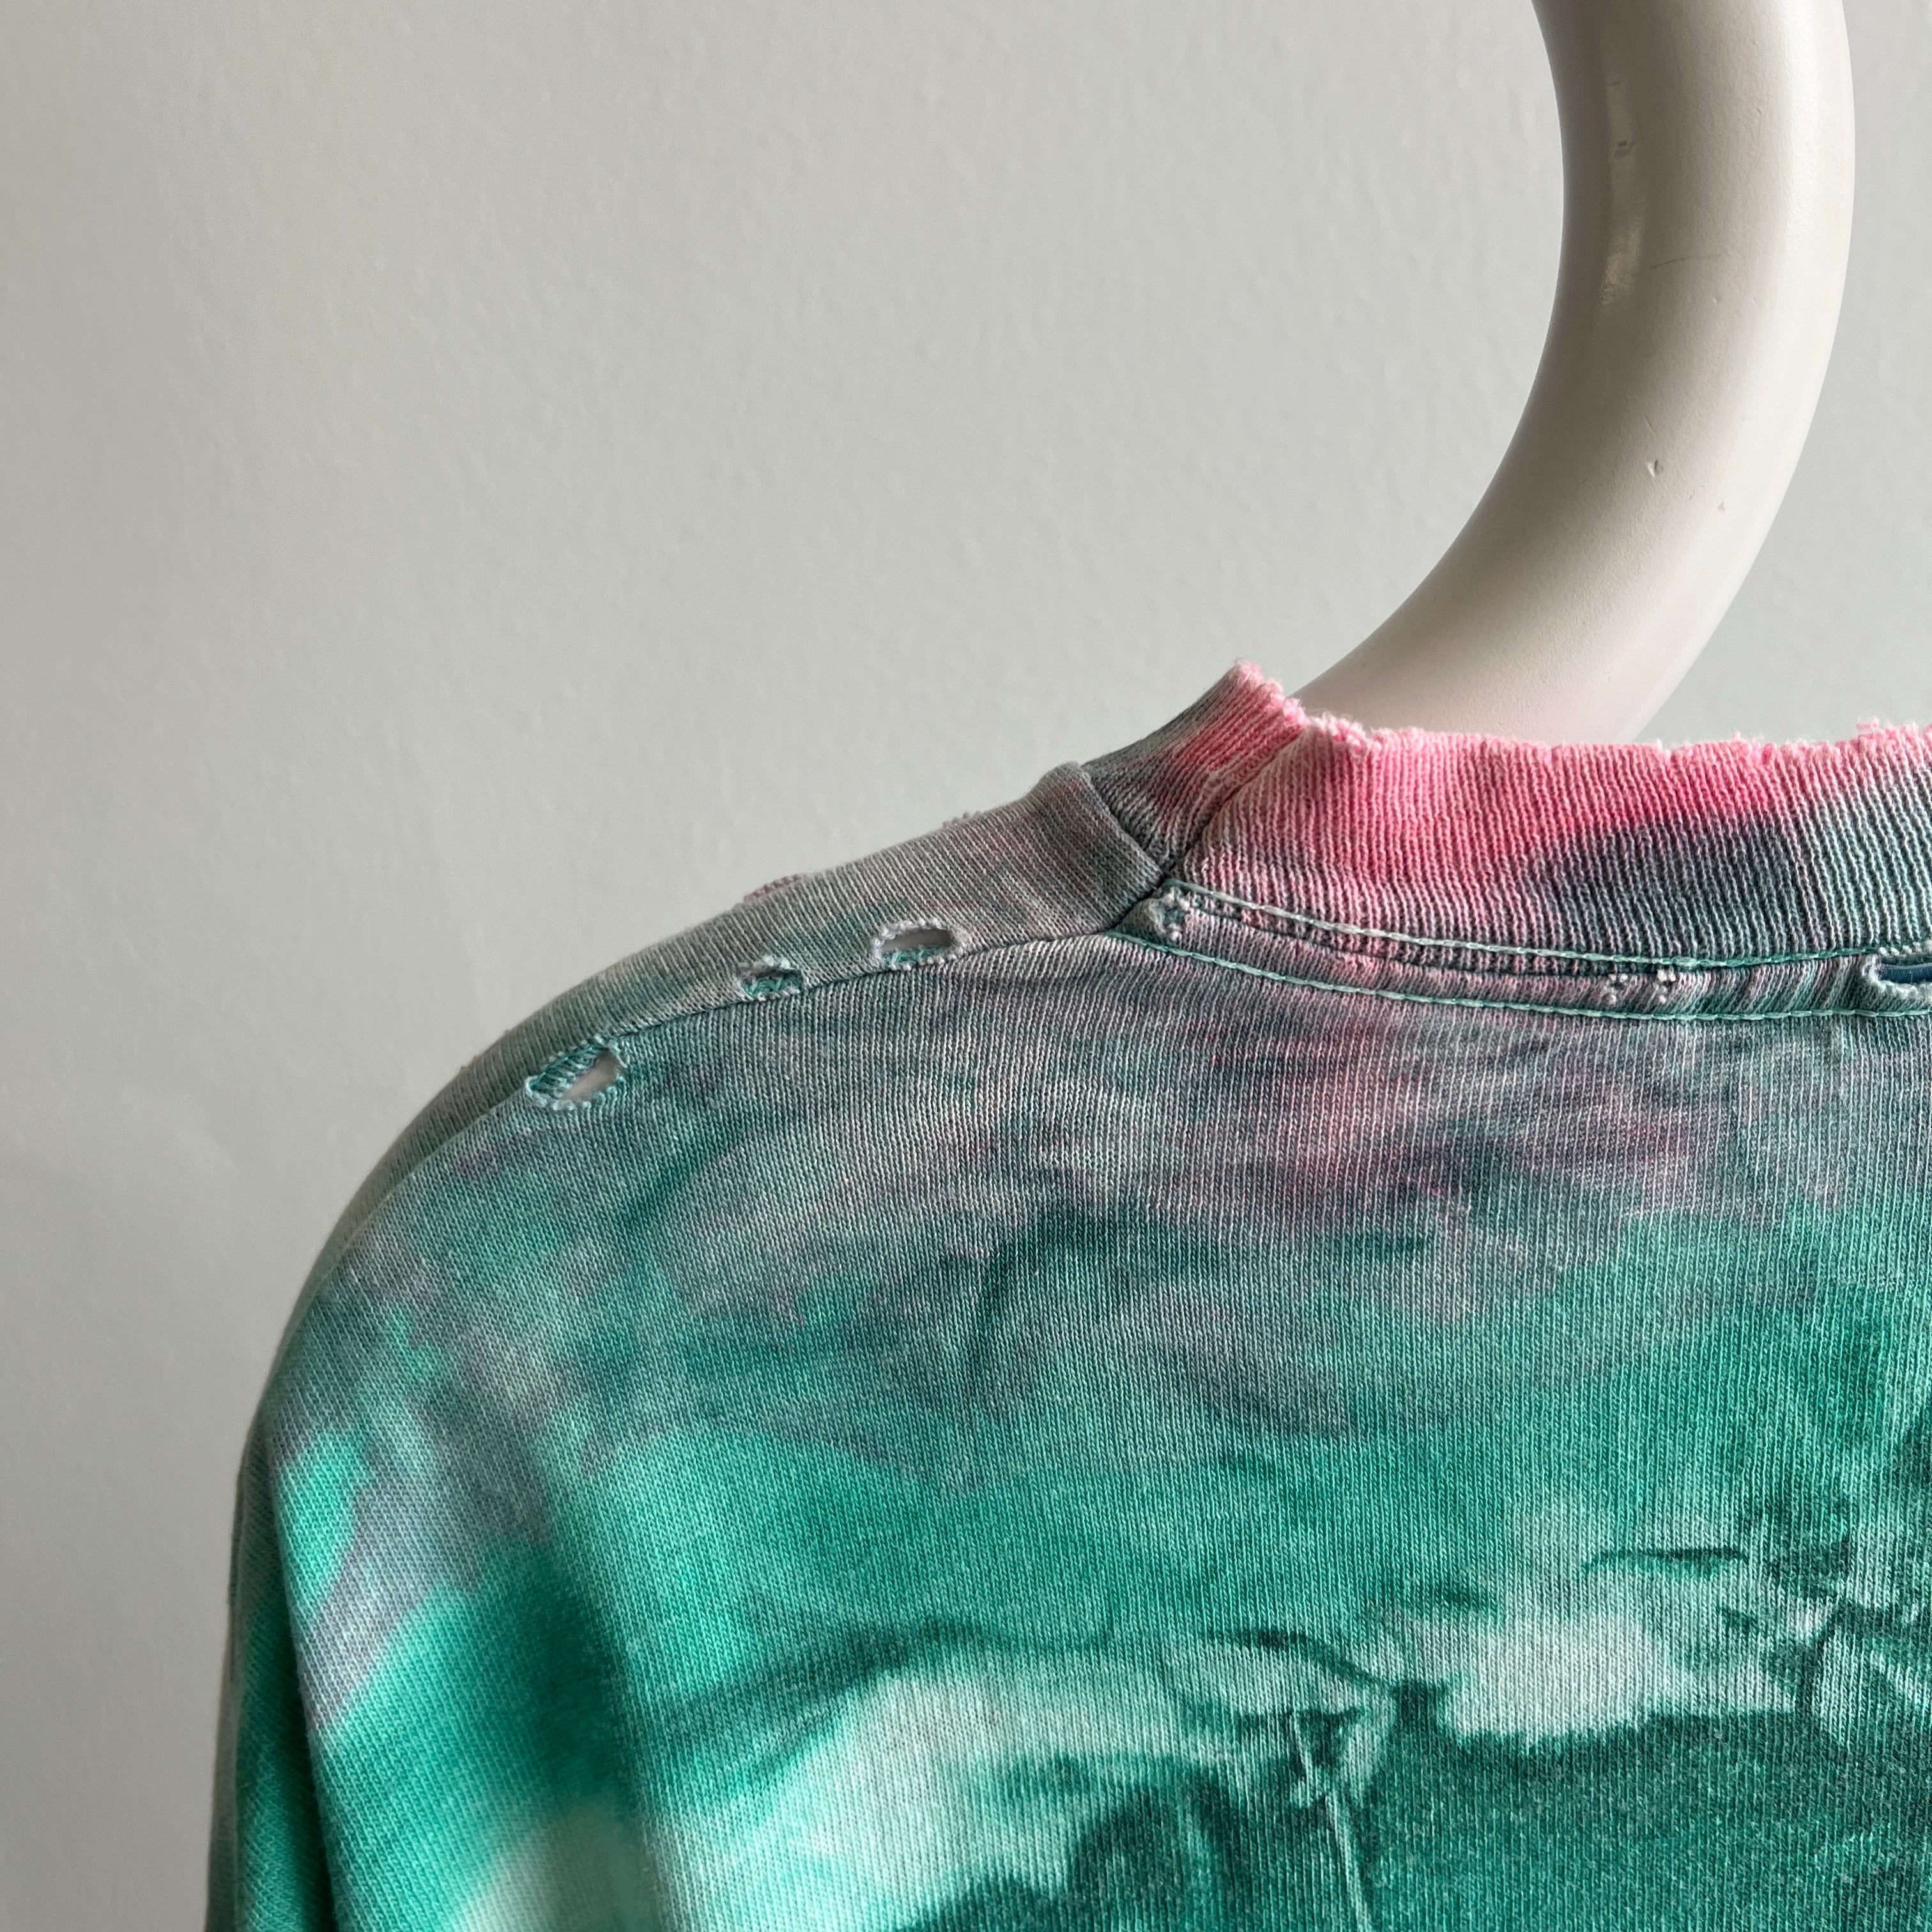 1980/90s Rad Tie Dye Pink and Green T-Shirt